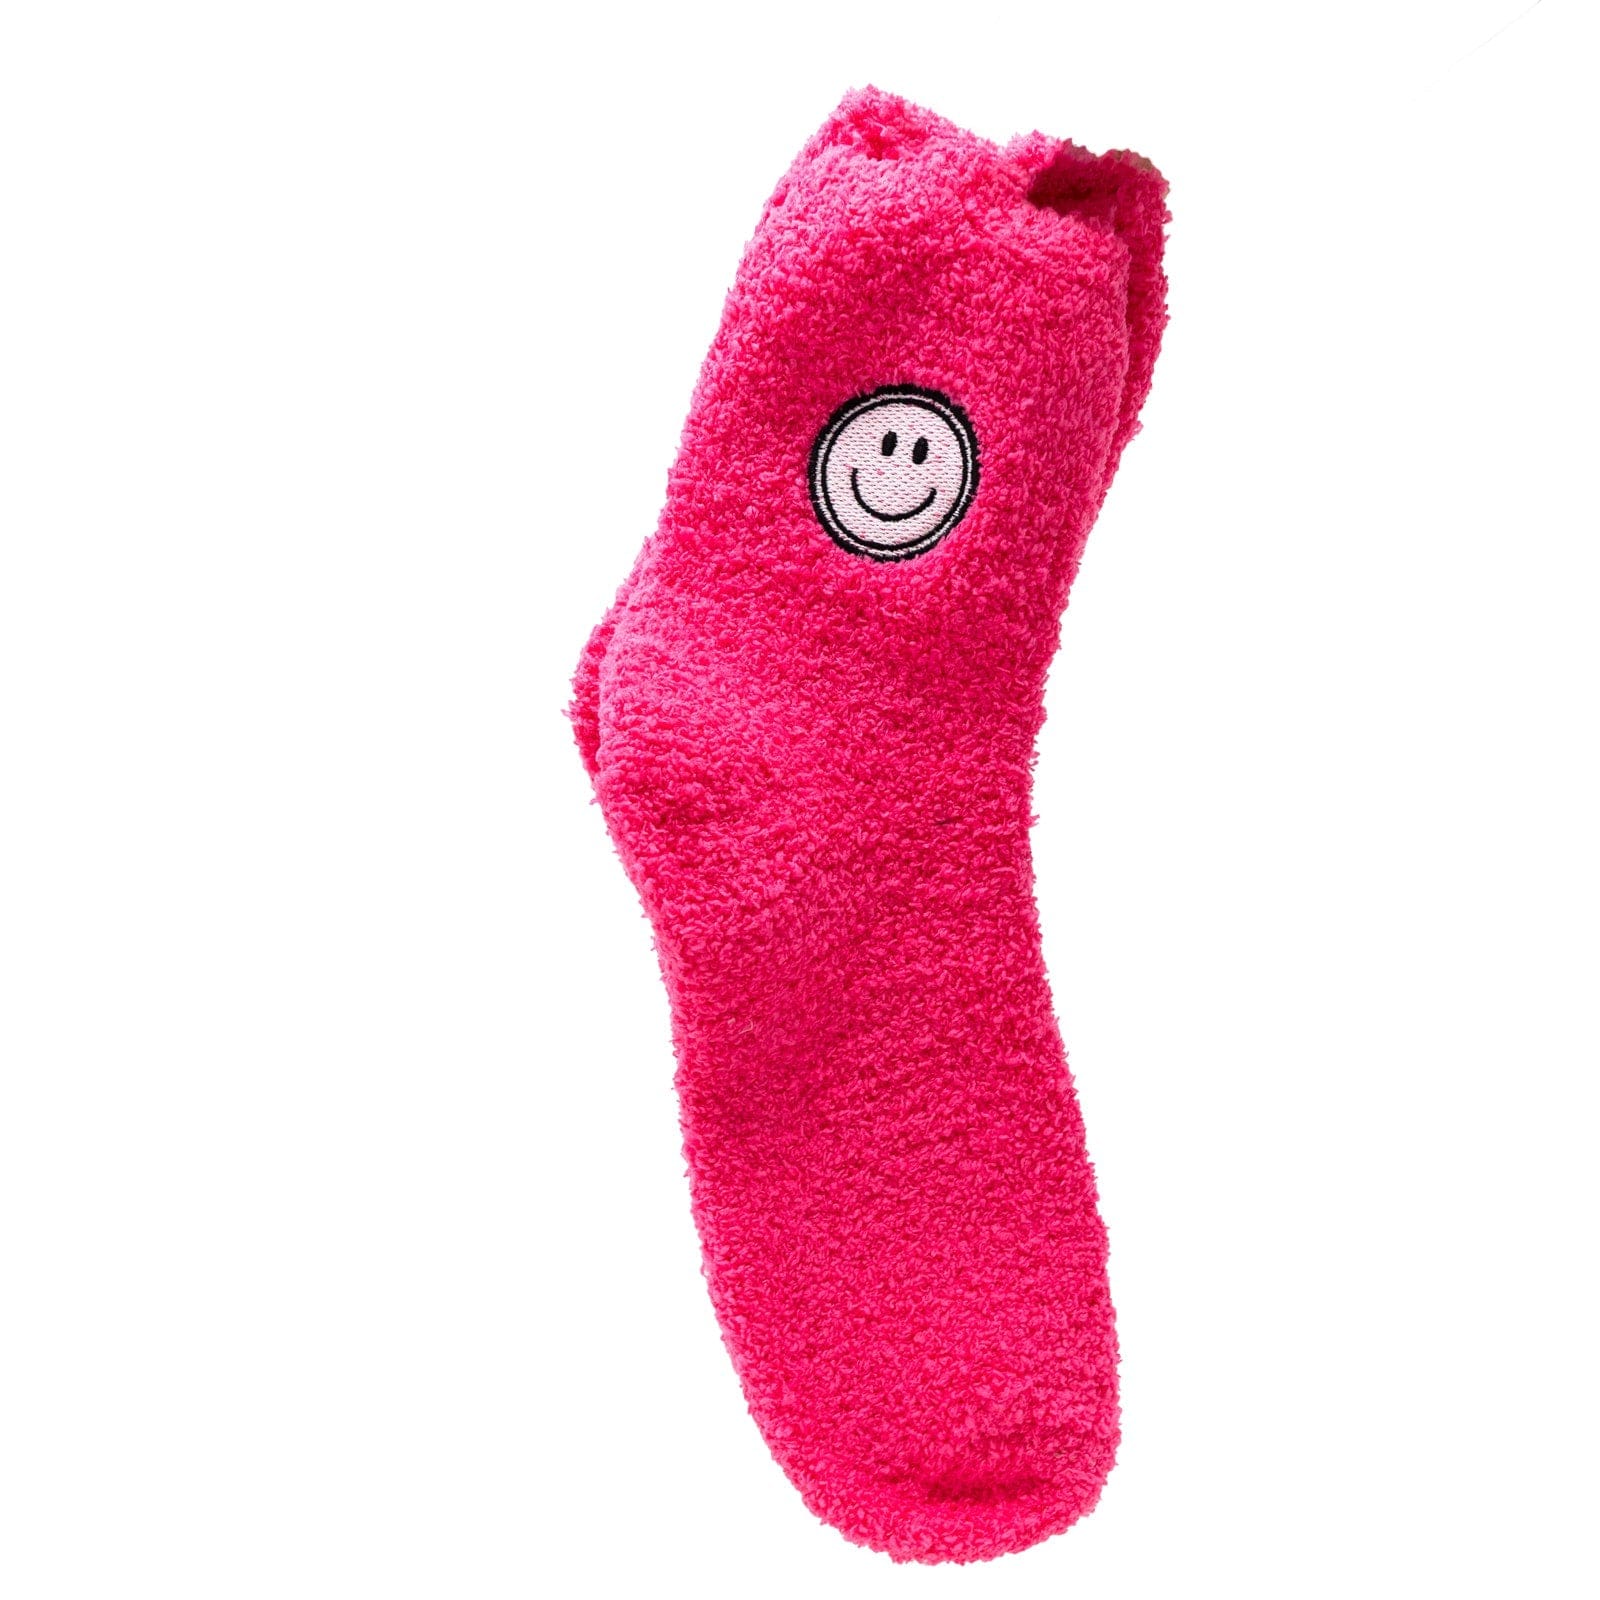 Mary Kathryn Design Apparel & Accessories Hot Pink Smiley Face Fuzzy Socks